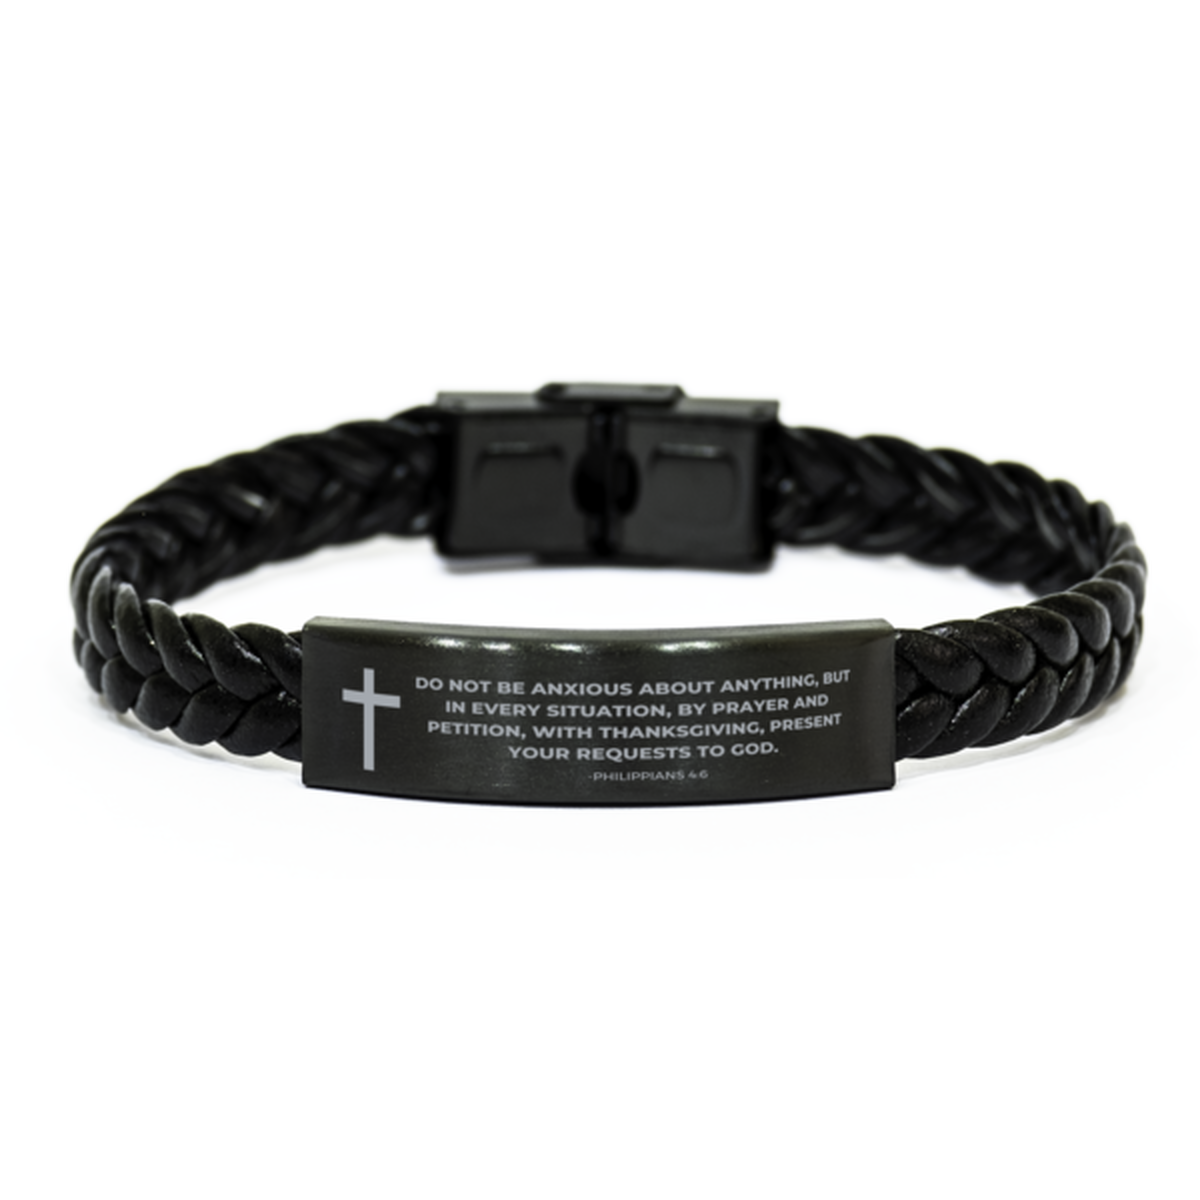 Baptism Gifts For Teenage Boys Girls, Christian Bible Verse Braided Leather Bracelet, Do not be anxious about anything, Catholic Confirmation Gifts for Son, Godson, Grandson, Nephew